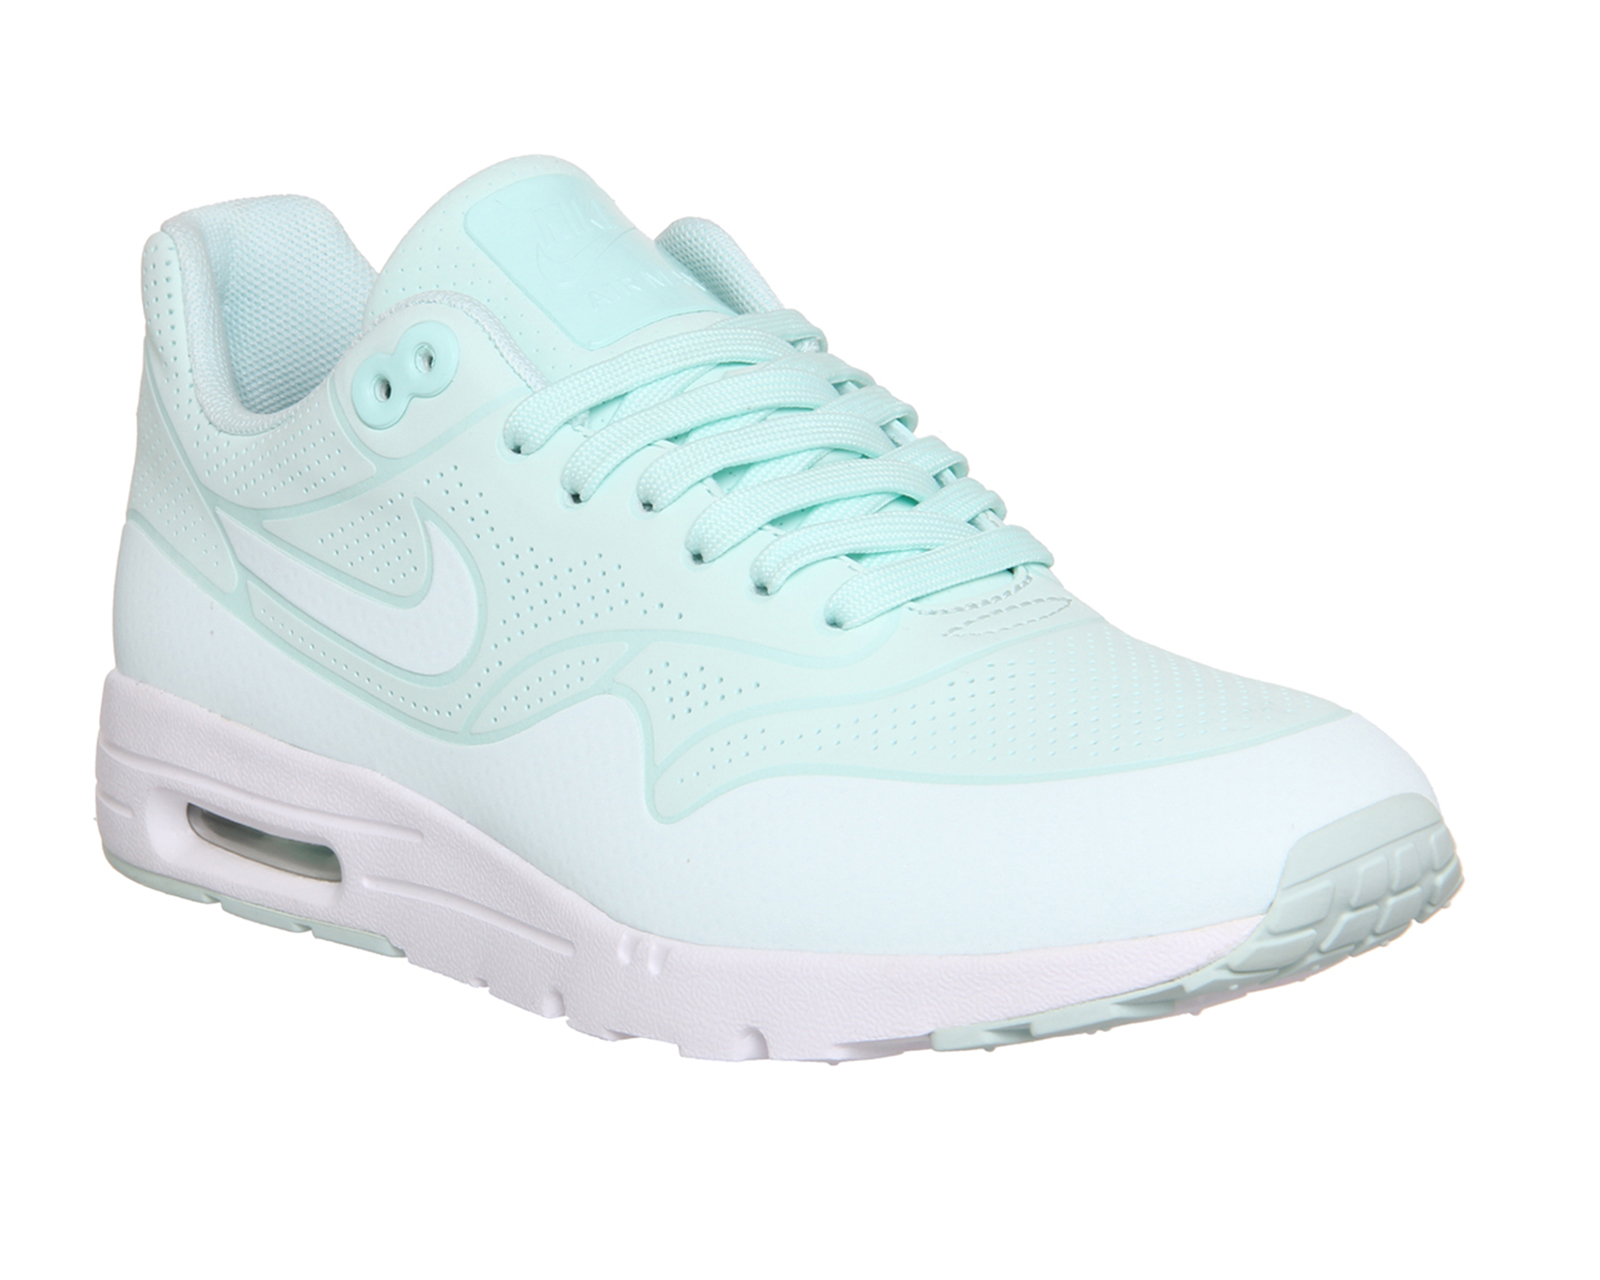 nike air max 1 ultra moire mint 62% - wuuproduction.com